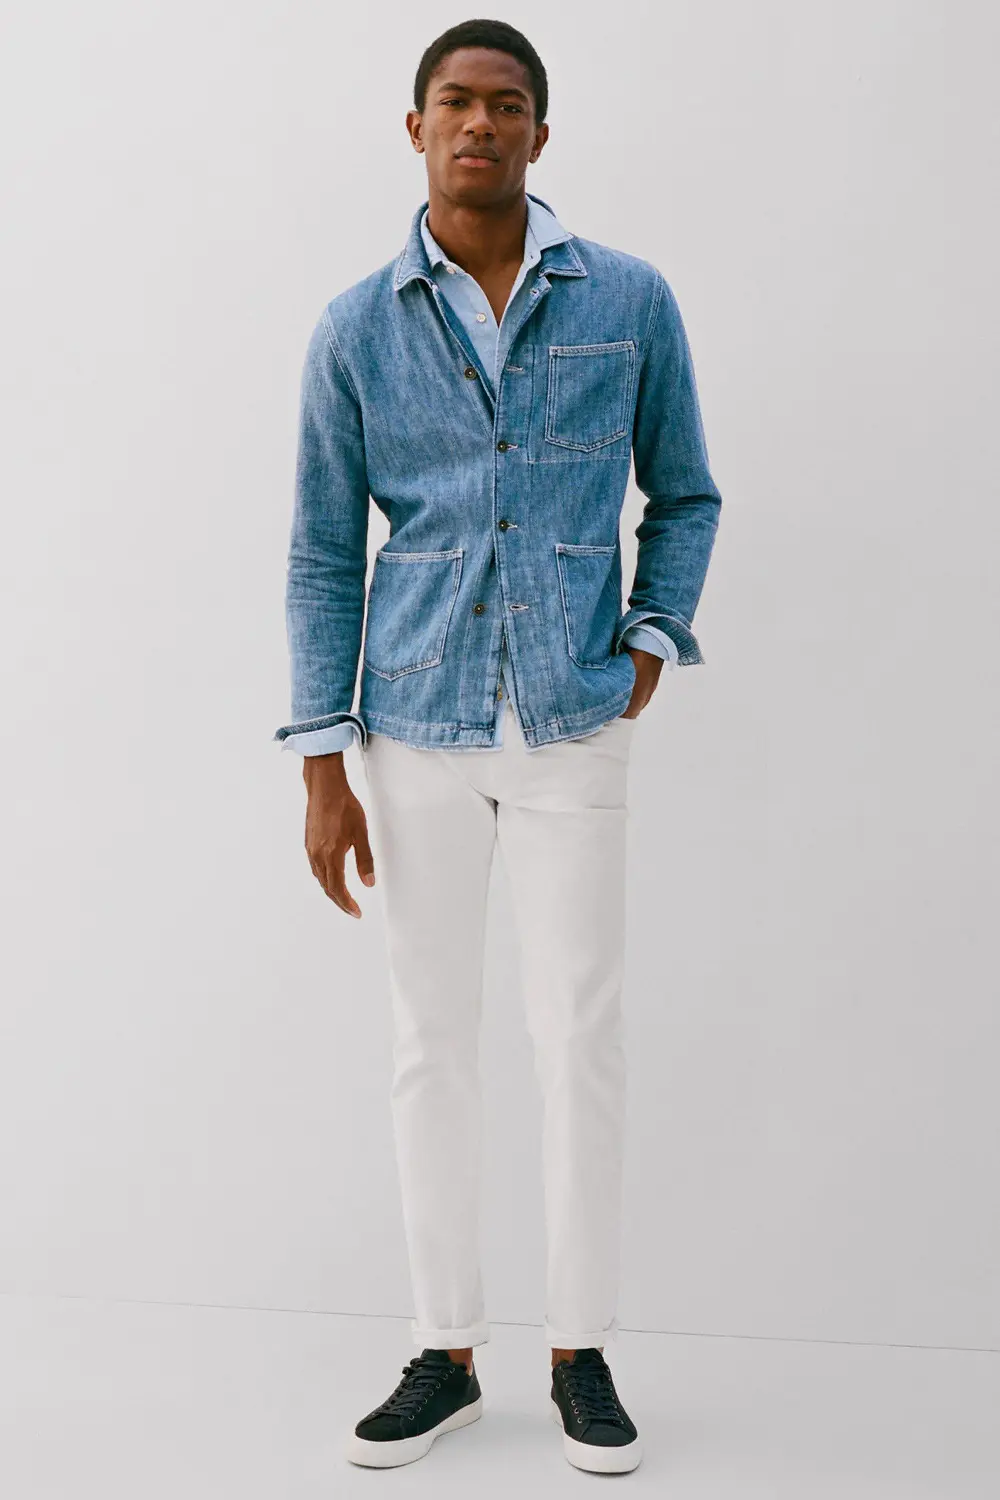 Blue Denim Shirt with White Pants Smart Casual Outfits For Men (25 ideas &  outfits) | Lookastic